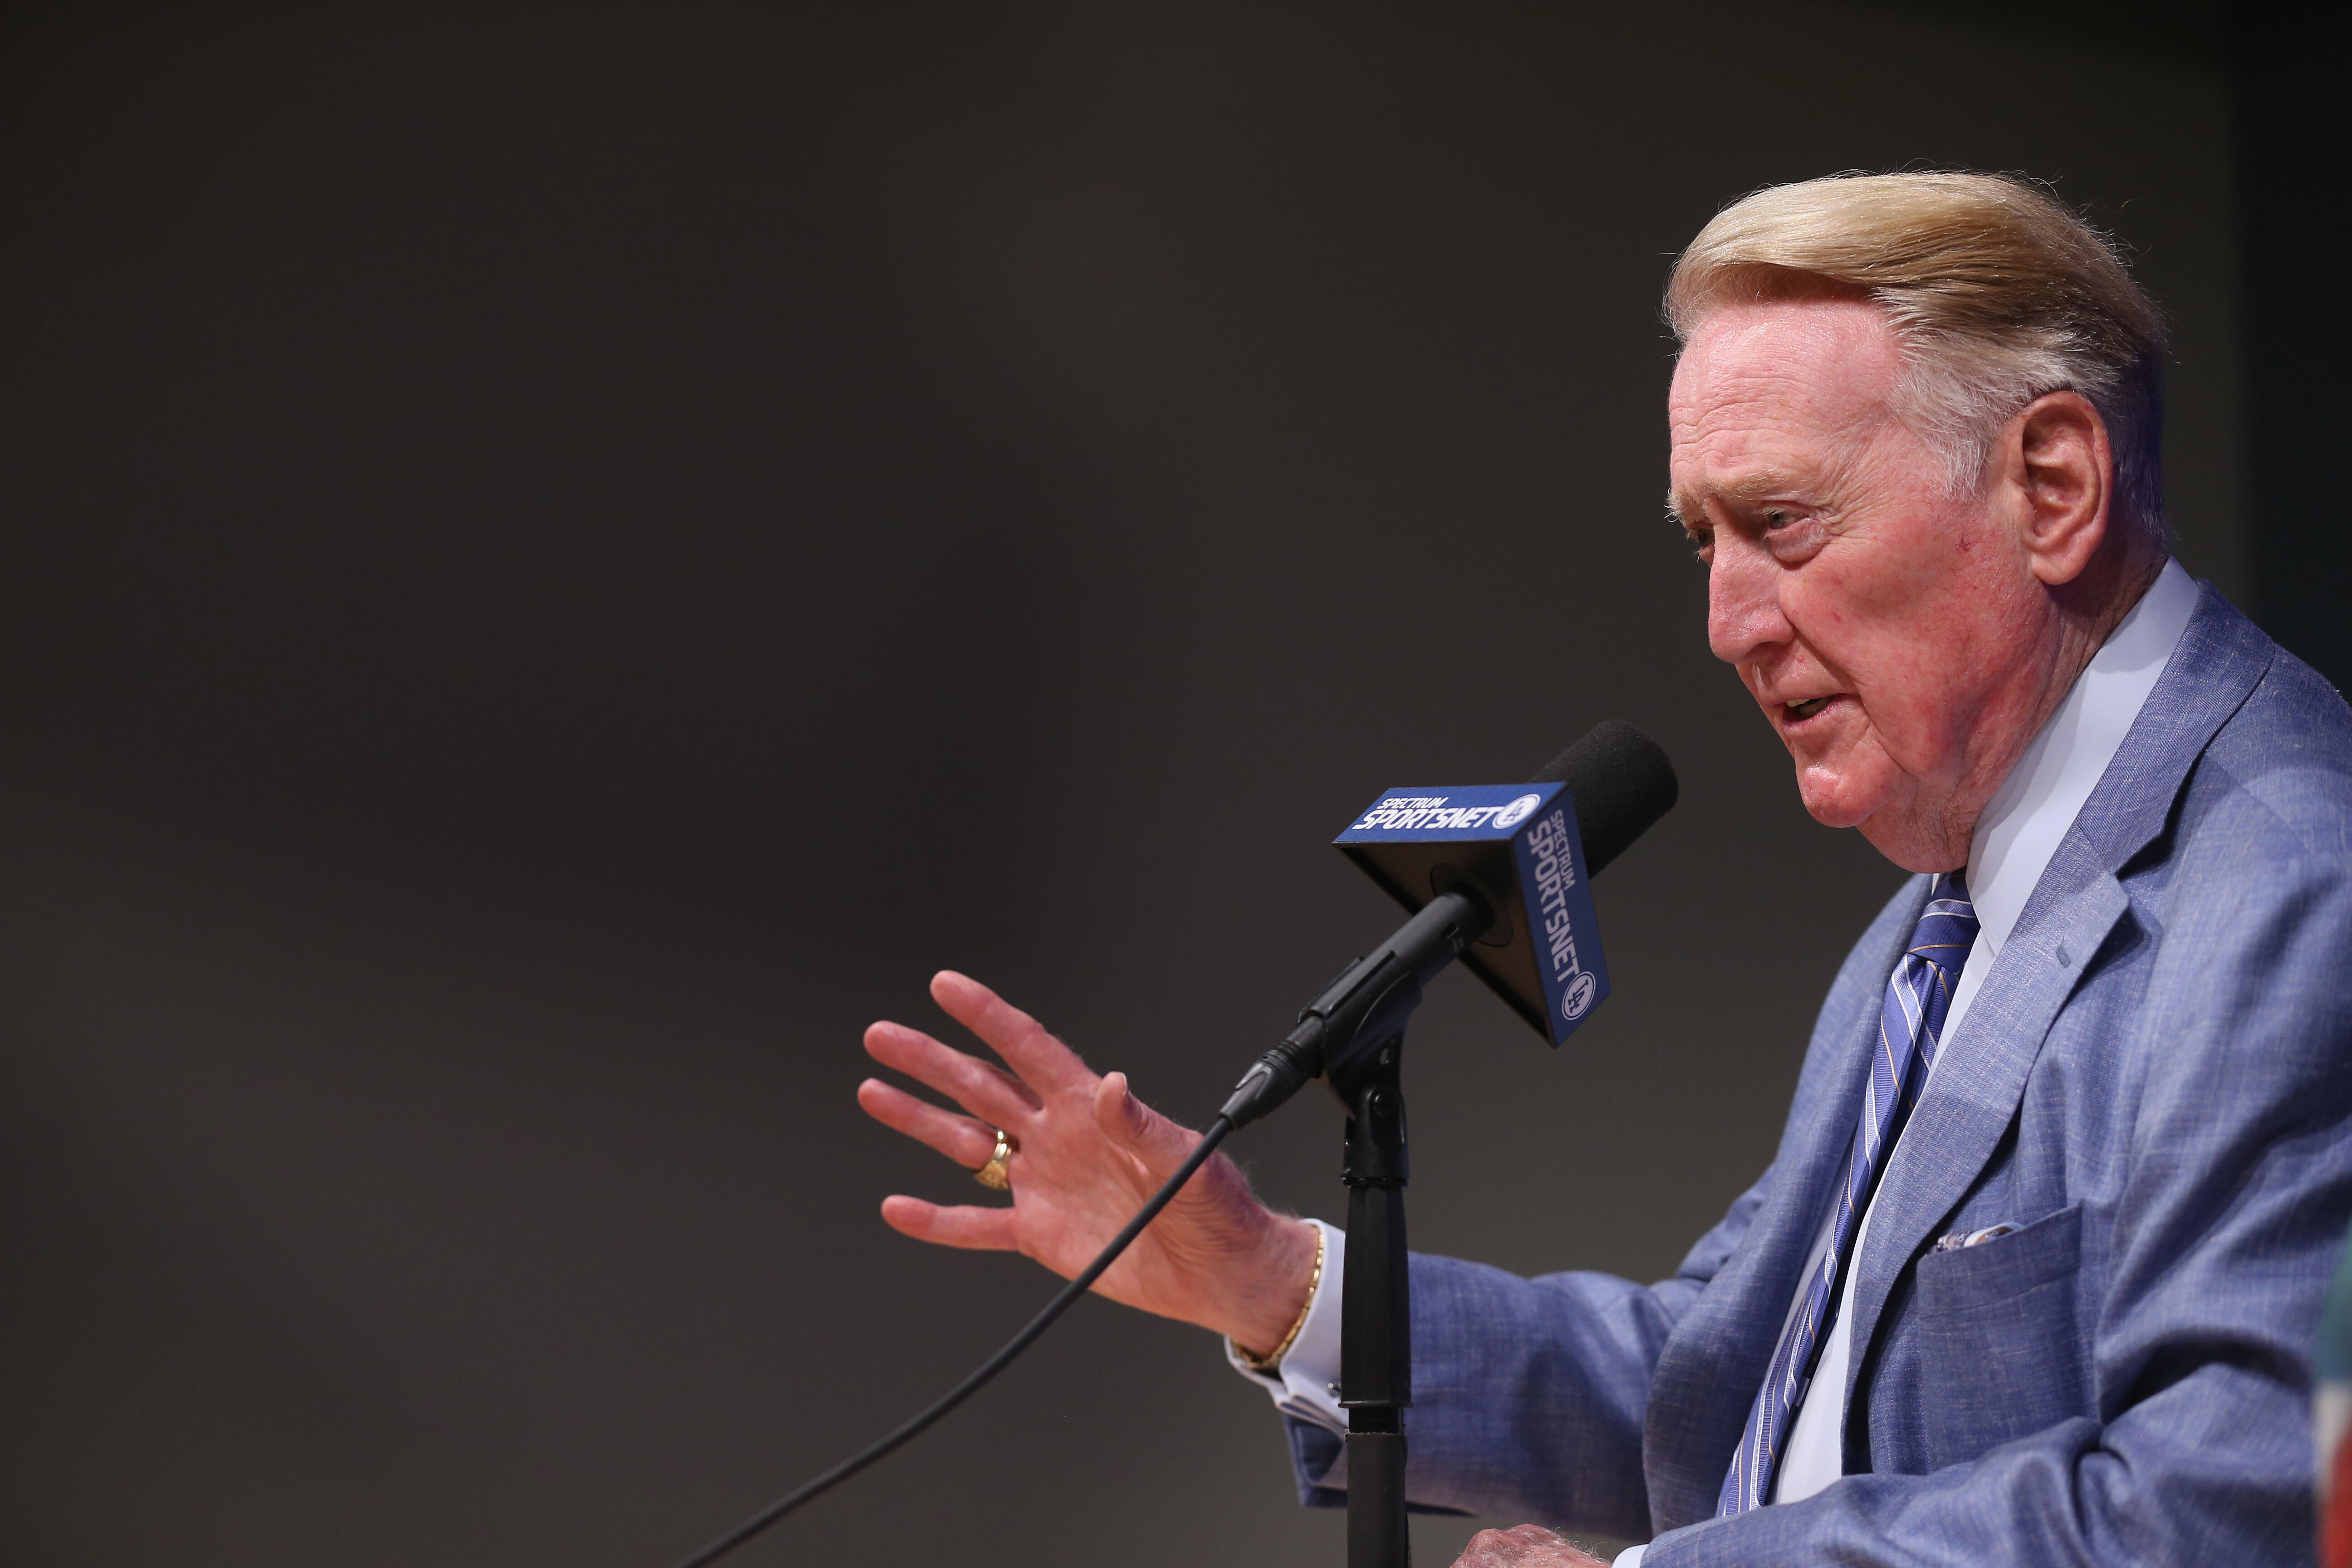 LOS ANGELES, CALIFORNIA - SEPTEMBER 24:  Long time Los Angeles Dodgers announcer Vin Scully speaks at a press conference discussing his career upcoming retirement at Dodger Stadium on September 24, 2016 in Los Angeles, California.  (Photo by Stephen Dunn/